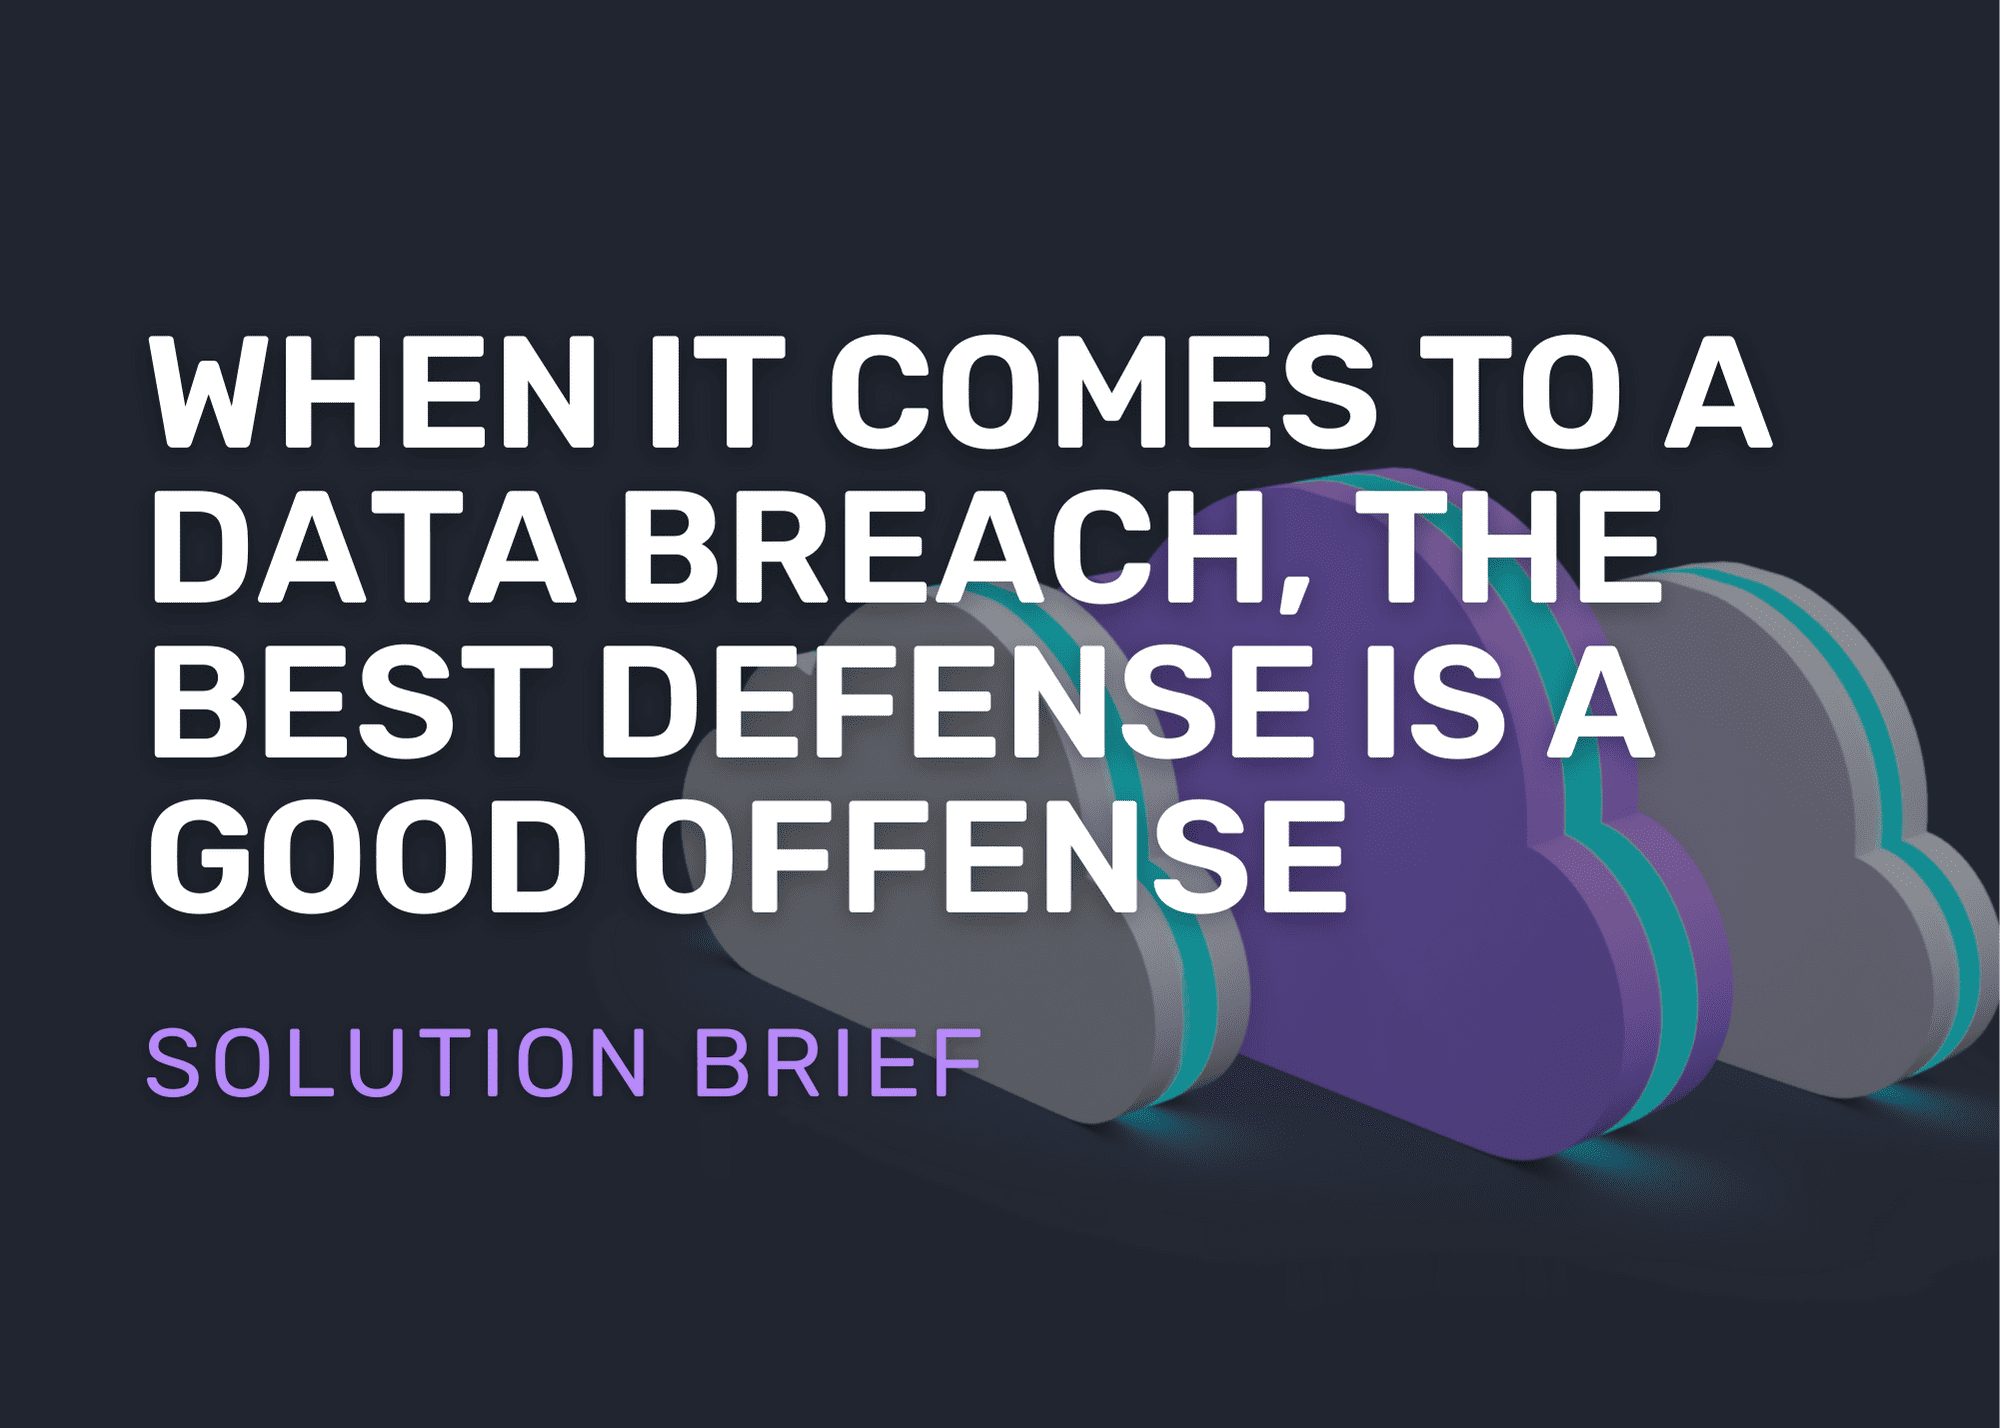 When it comes to a data breach the best offense is a good defense solution brief